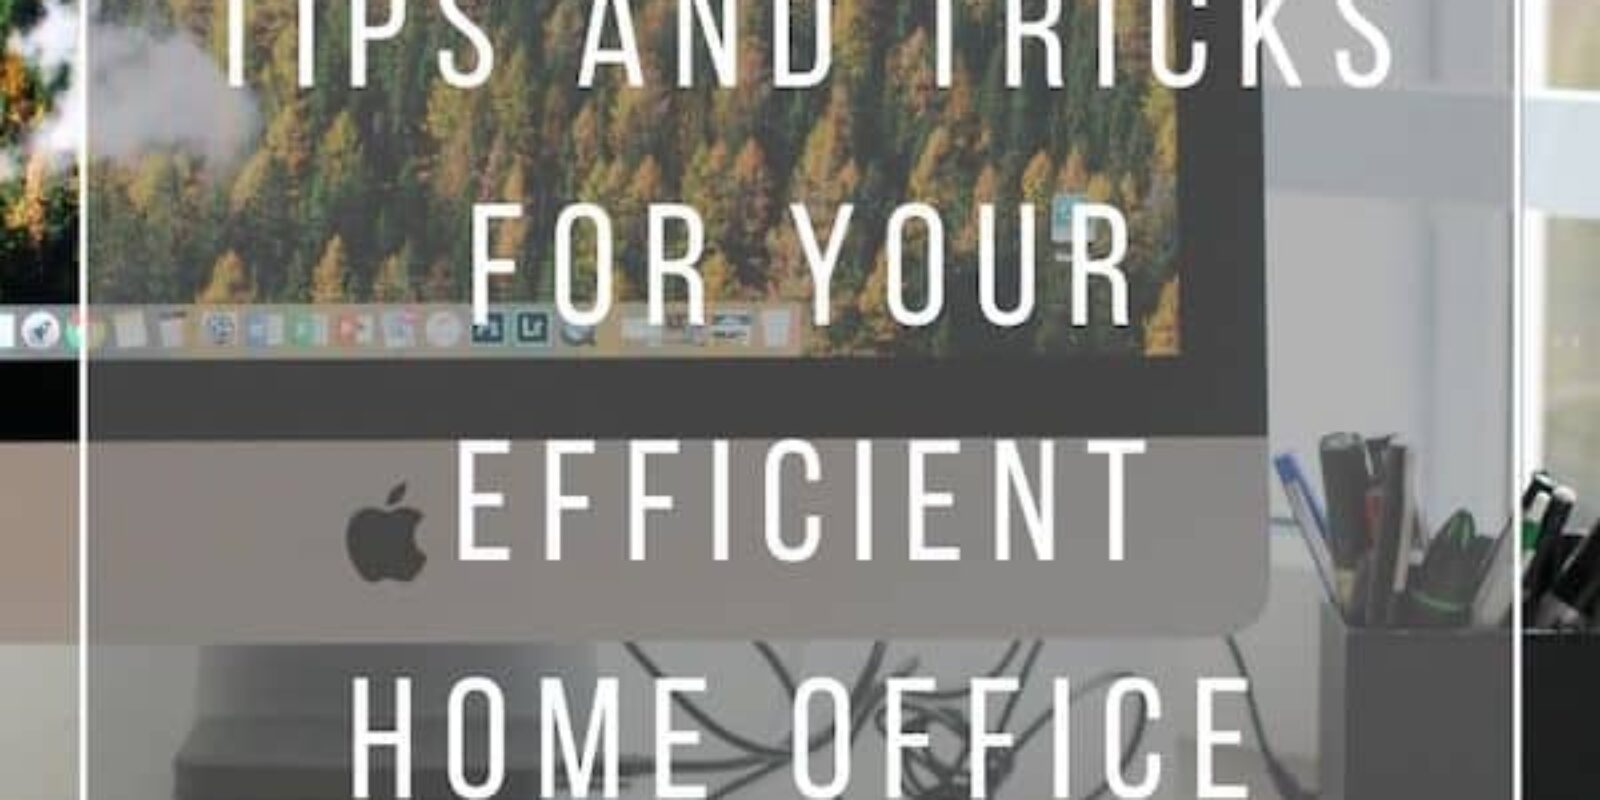 Tips and Tricks for your efficient home office